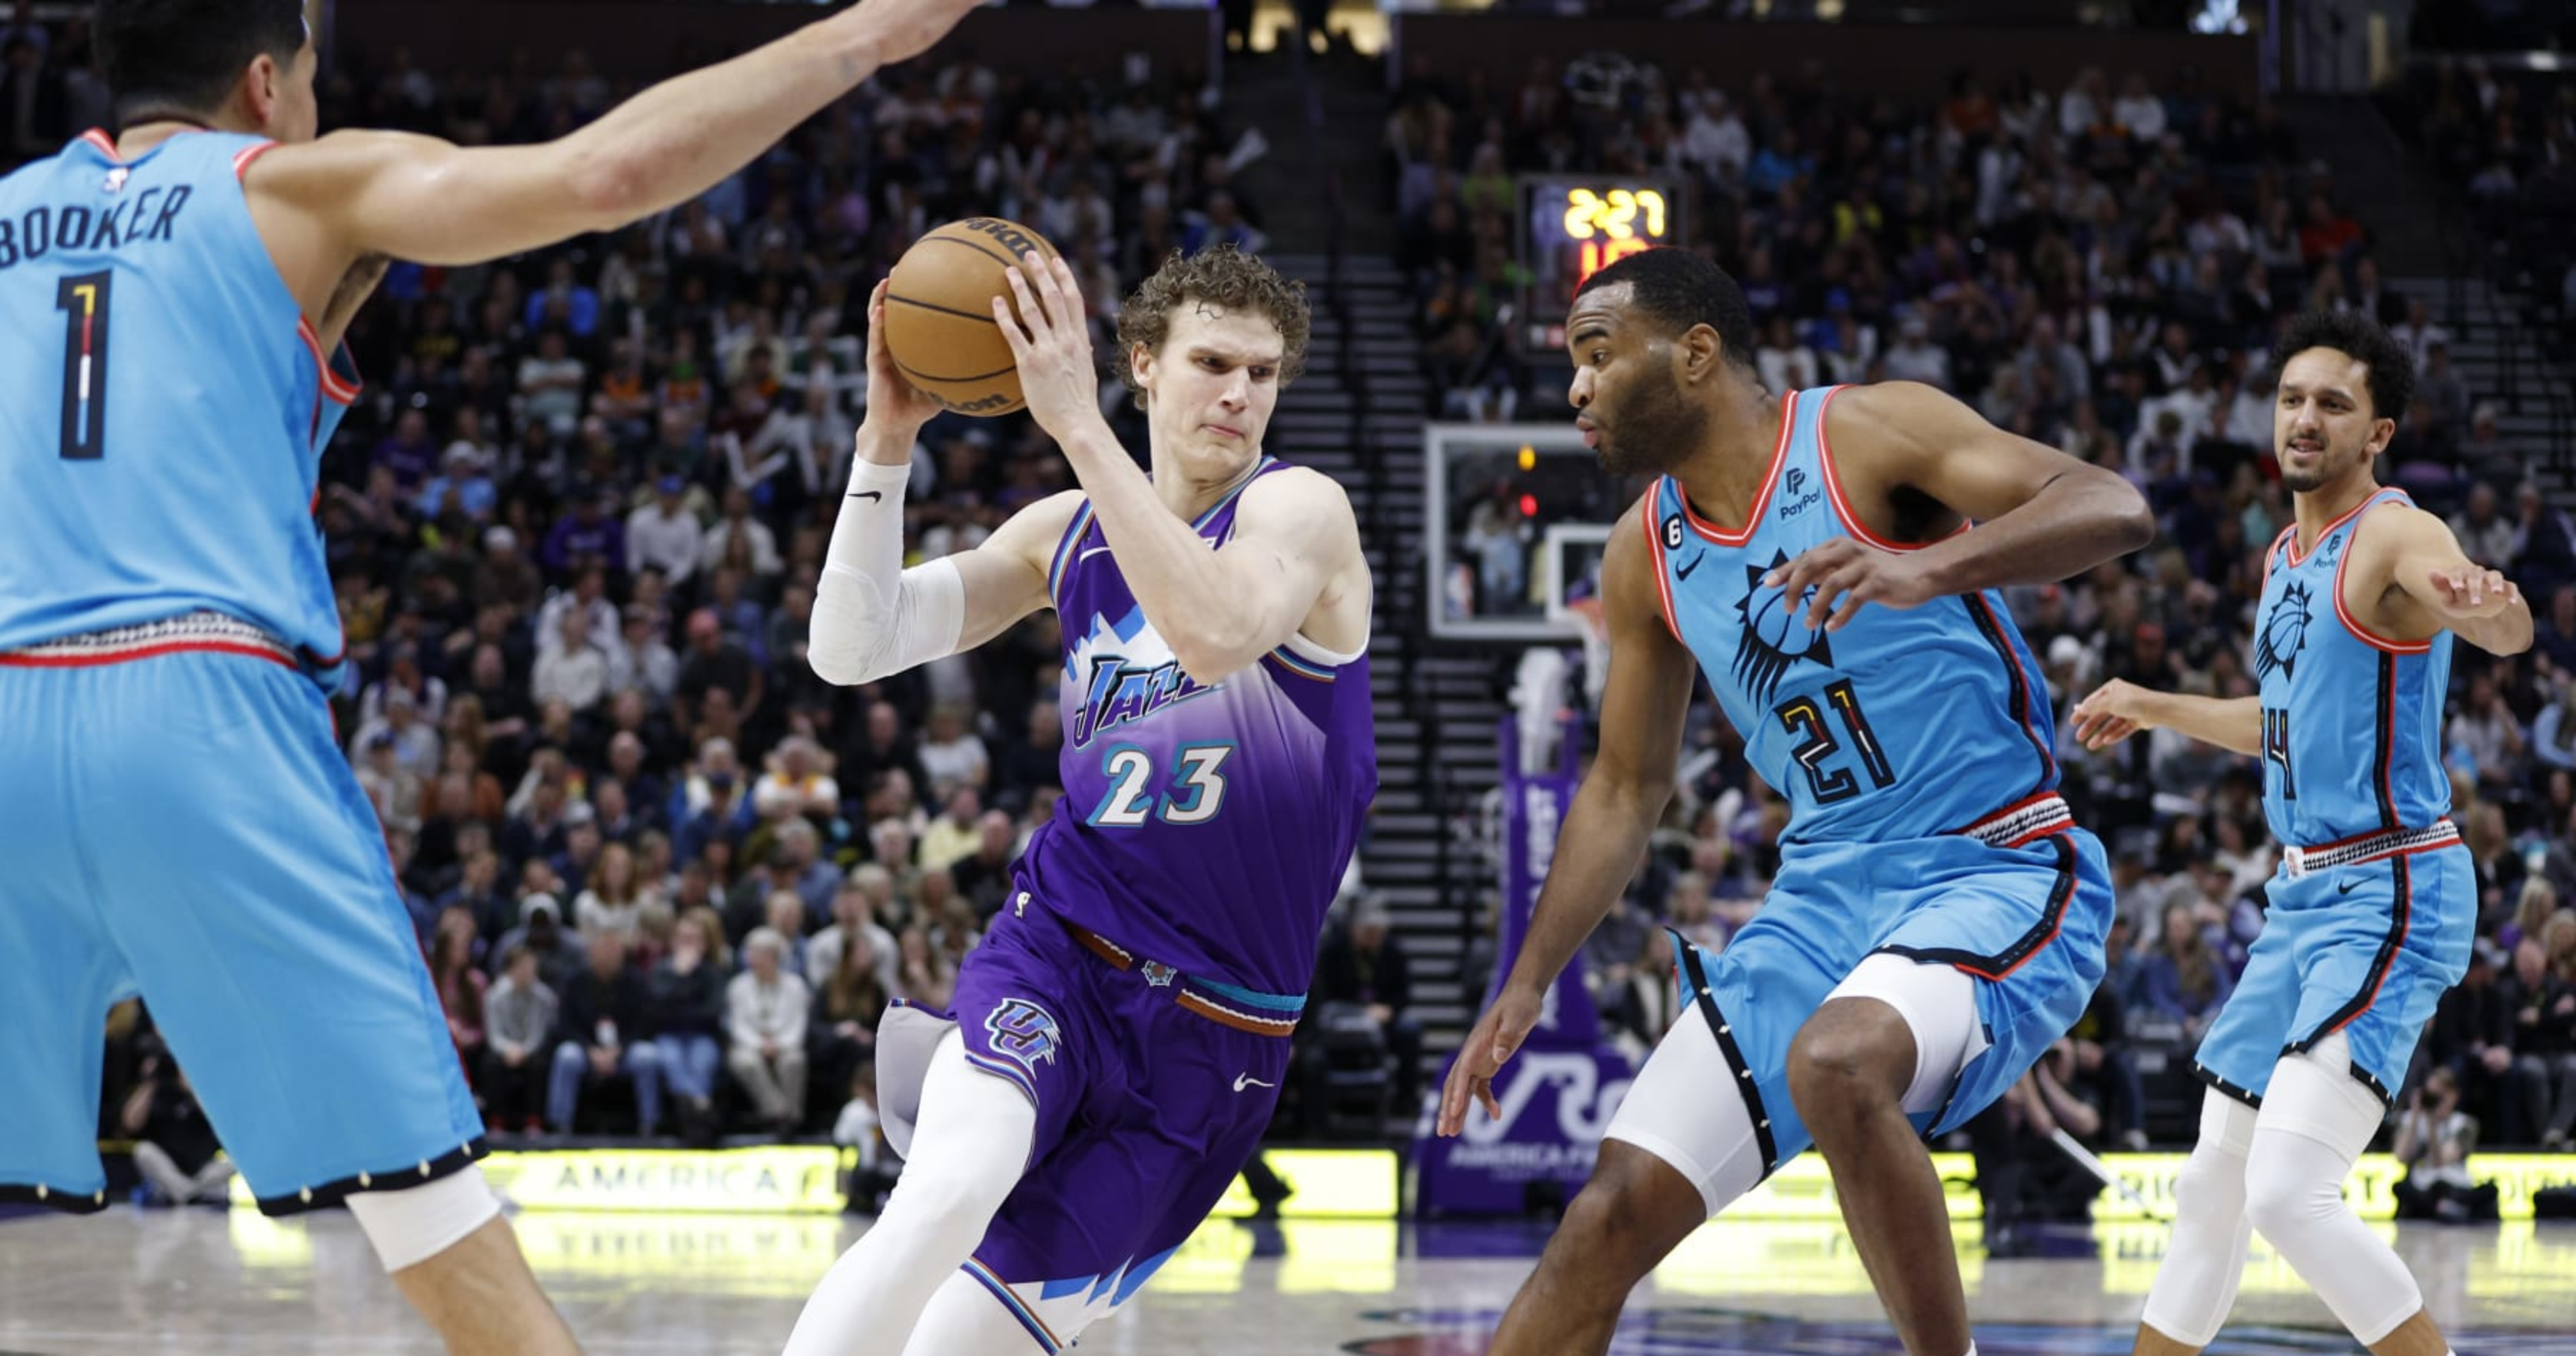 Lauri Markkanen might be this year's surprise All-Star for the